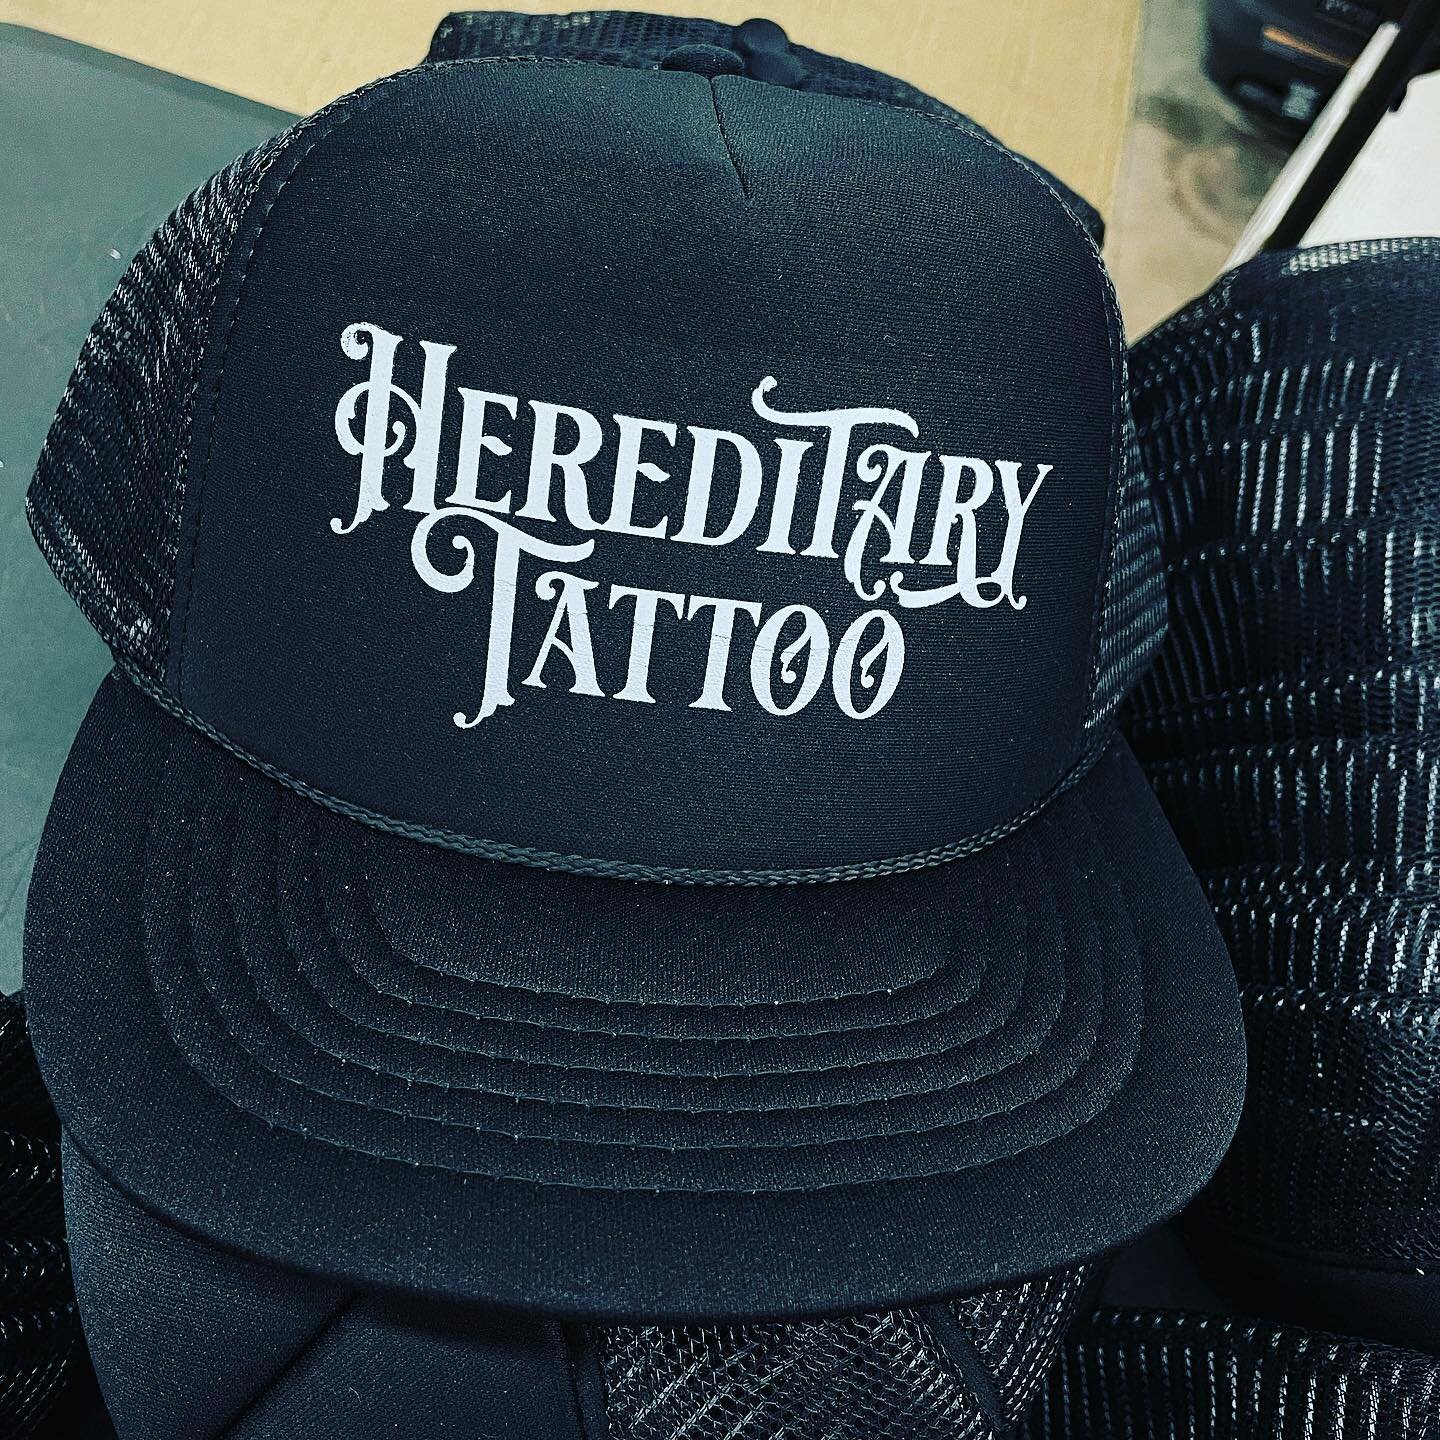 Need custom merch? Let us know what you need, we&rsquo;ll get back to you with pricing. #custom #apparel #tshirt #hat #merch #ink #screenprinting #spaceboyclothing #wilmde #hereditarytattoo